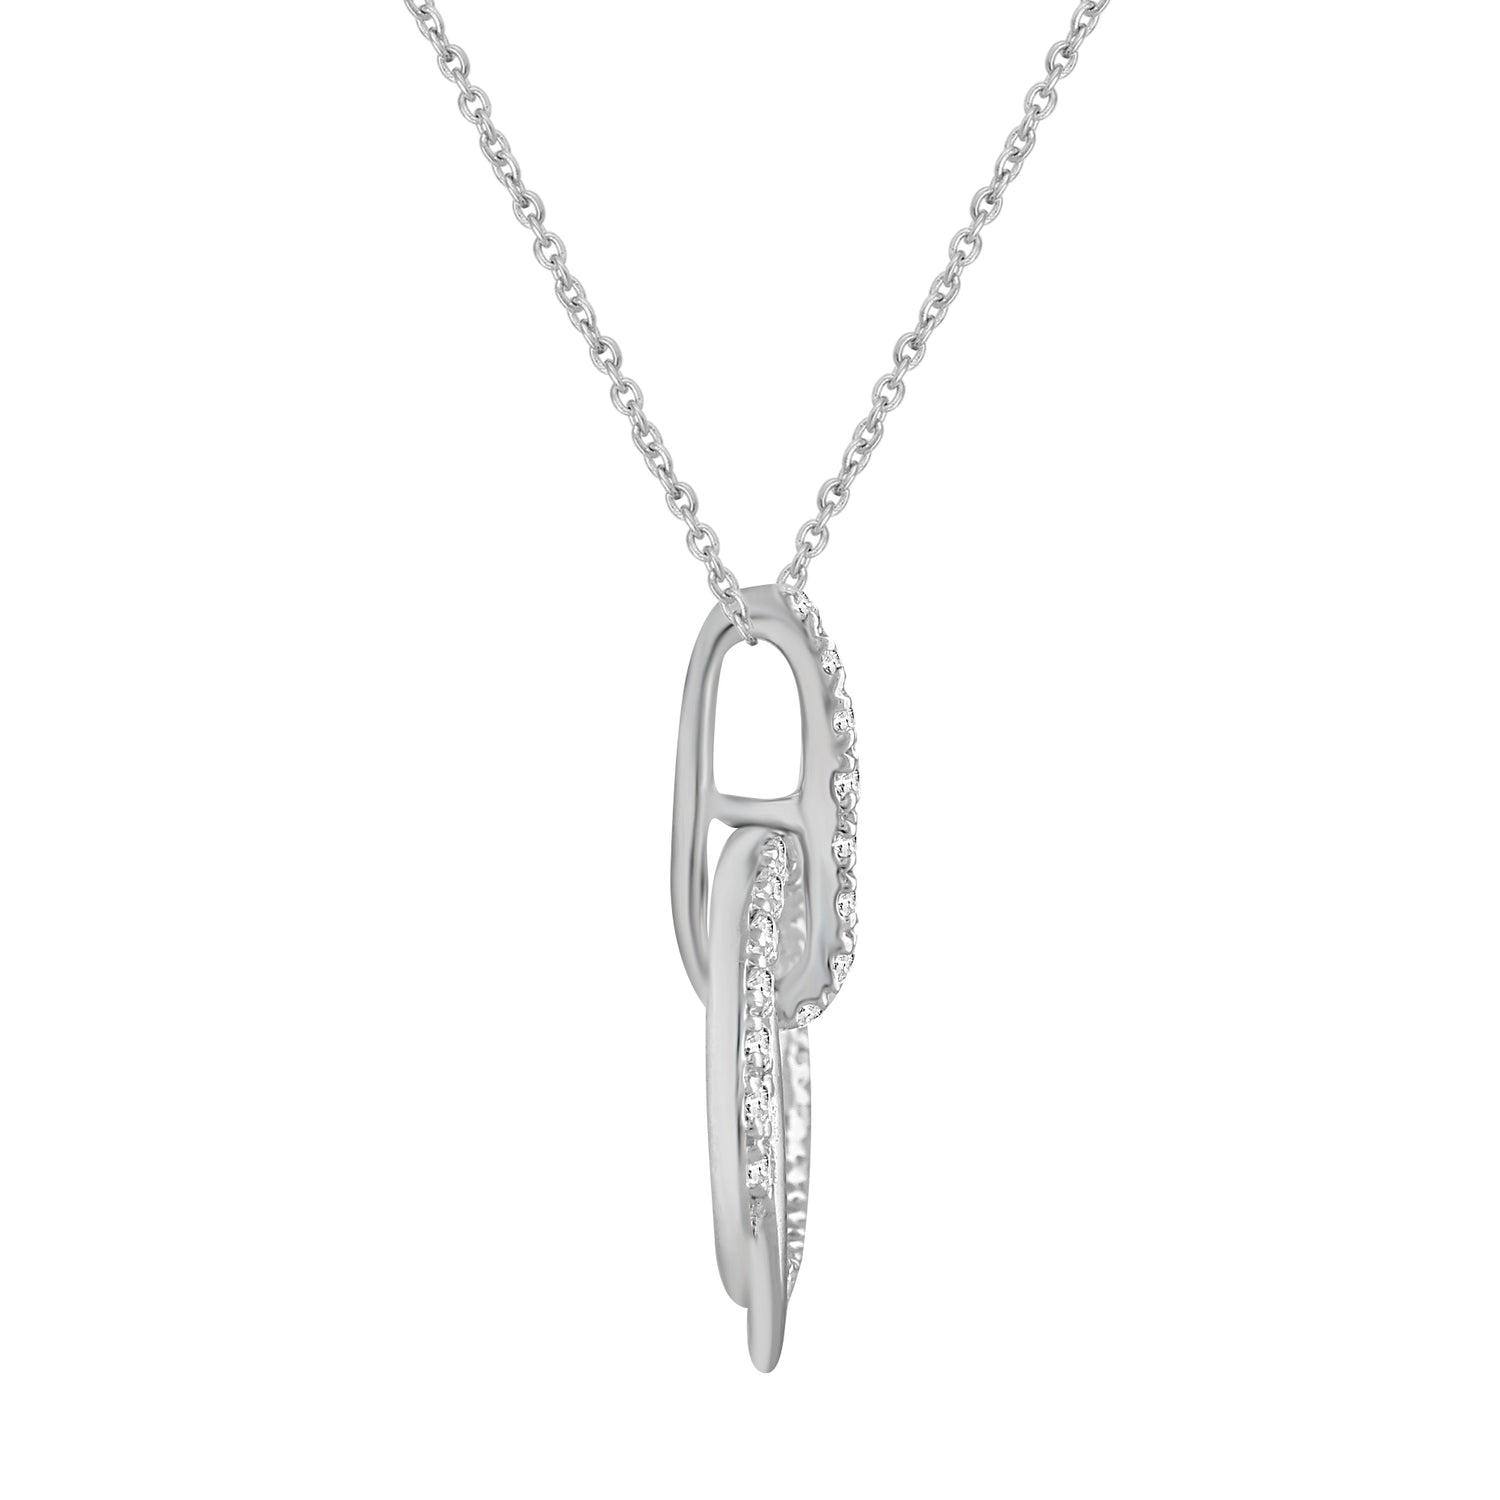 1/6 CT TW Diamond Floating Duo Circle Pendant Necklace in 925 Sterling Silver